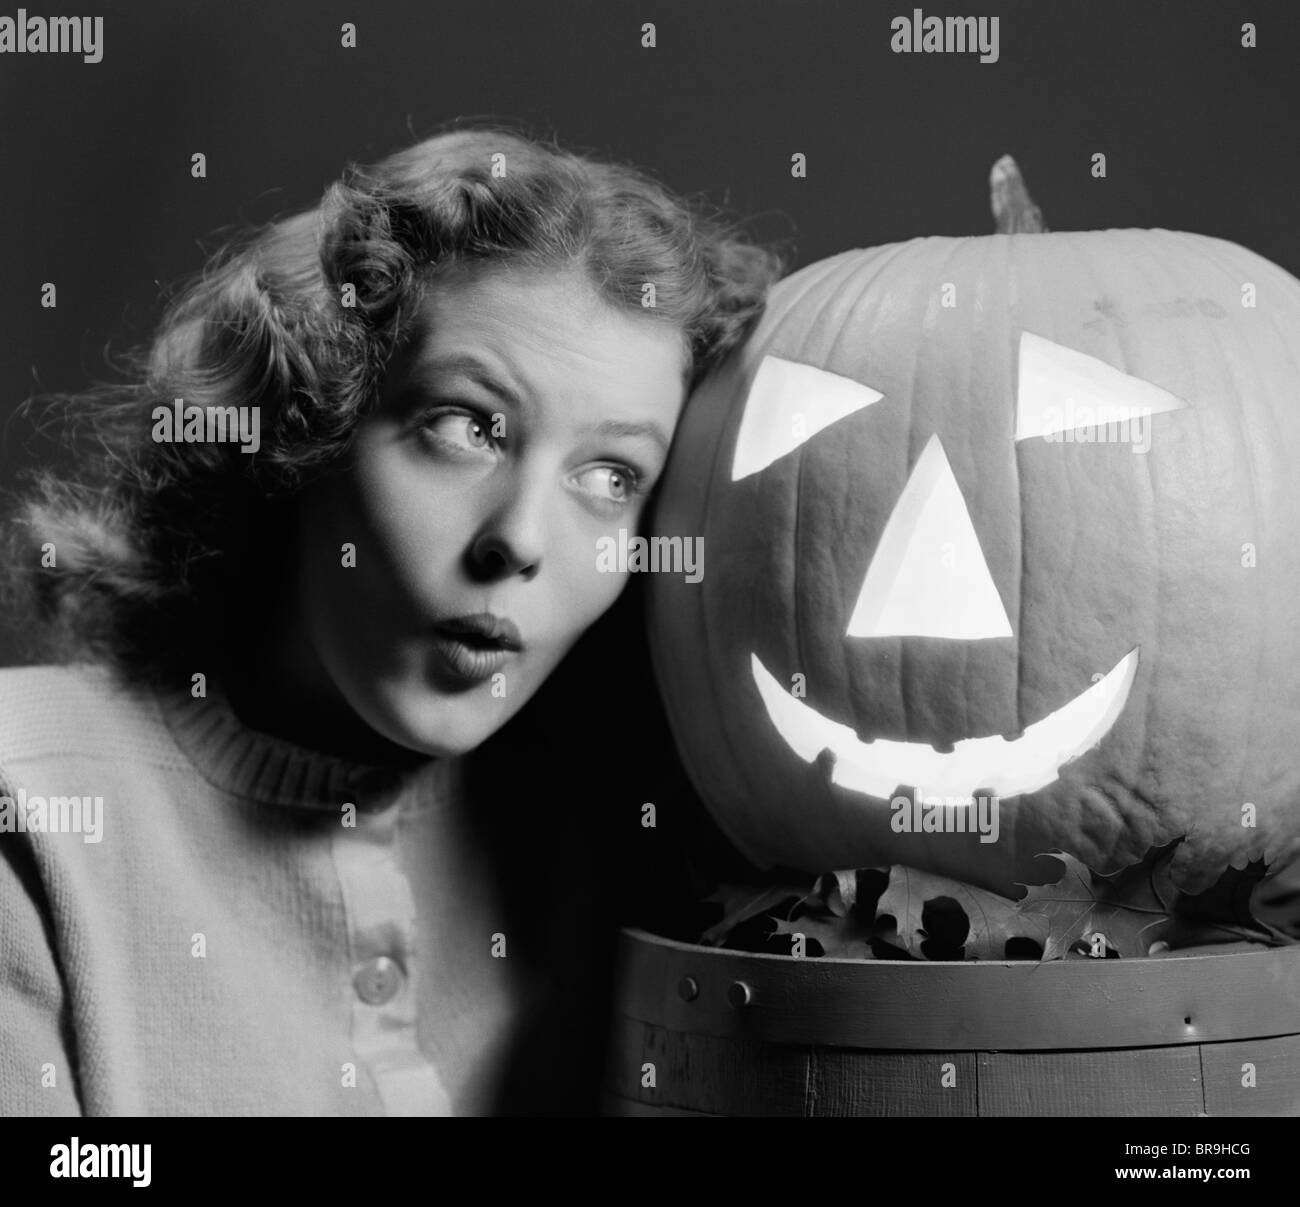 1940s TEEN GIRL WITH SCARED EXPRESSION HEAD TO HEAD WITH CARVED PUMPKIN JACK-O-LANTERN Stock Photo